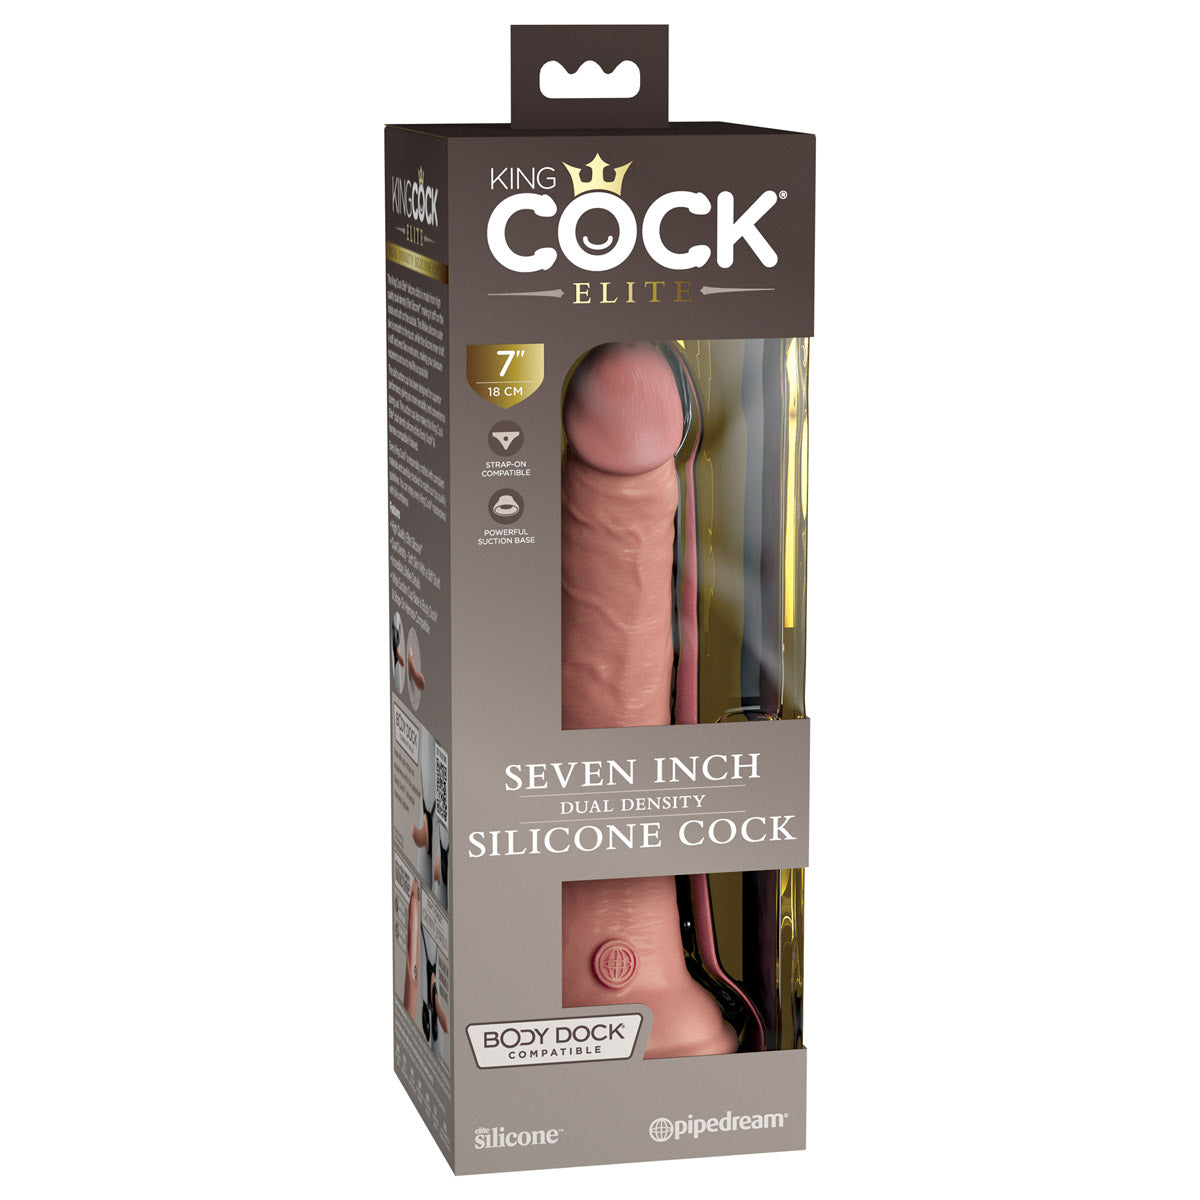 King Cock Elite 7" Silicone Dual Density Cock - Light - Thorn & Feather Sex Toy Canada